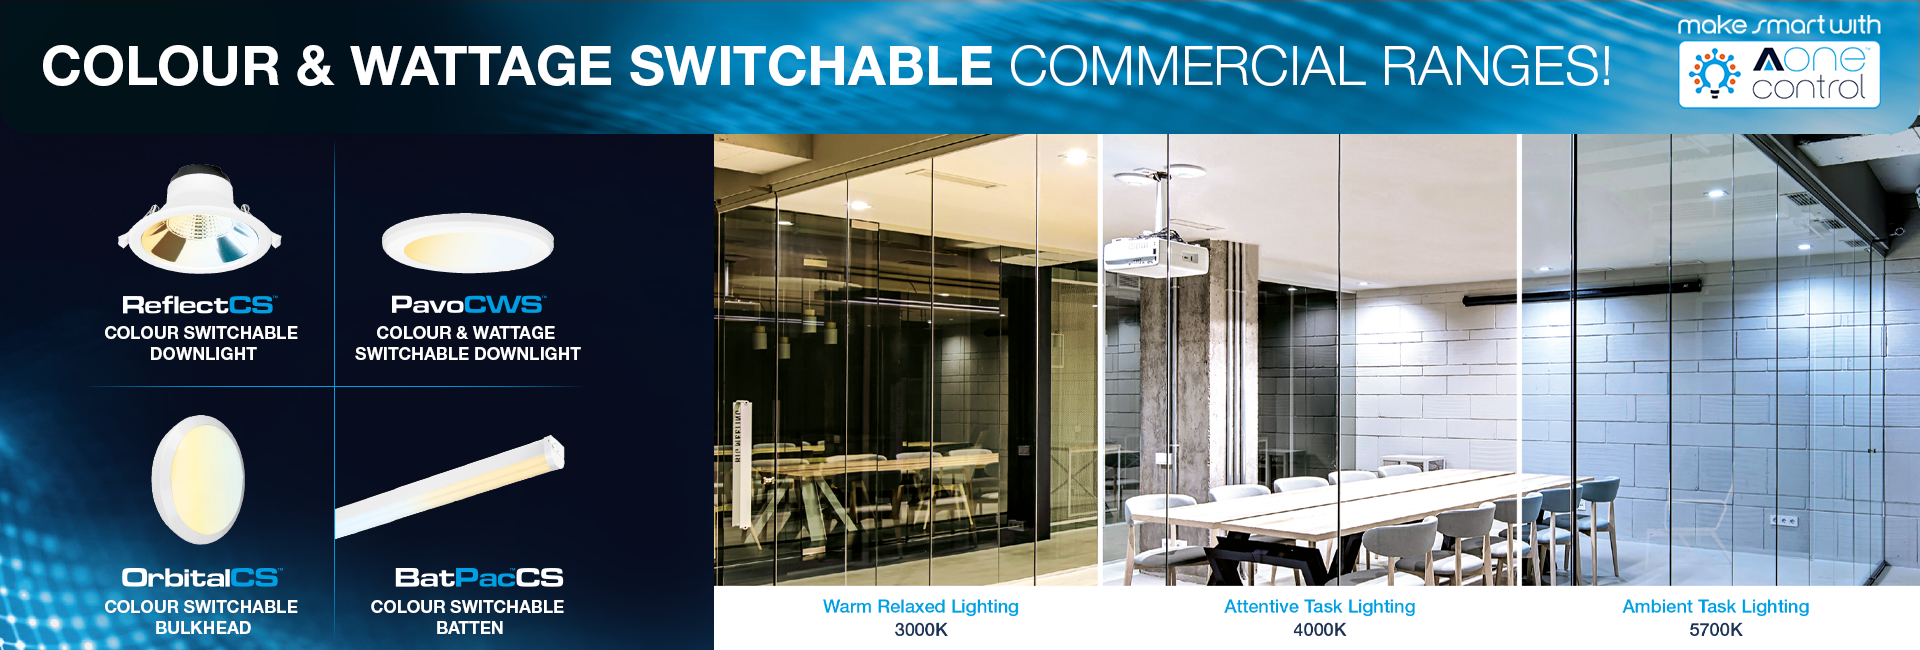 Show products in category Need to Improve Commercial Spaces? Try Colour & Wattage Switchable Lighting